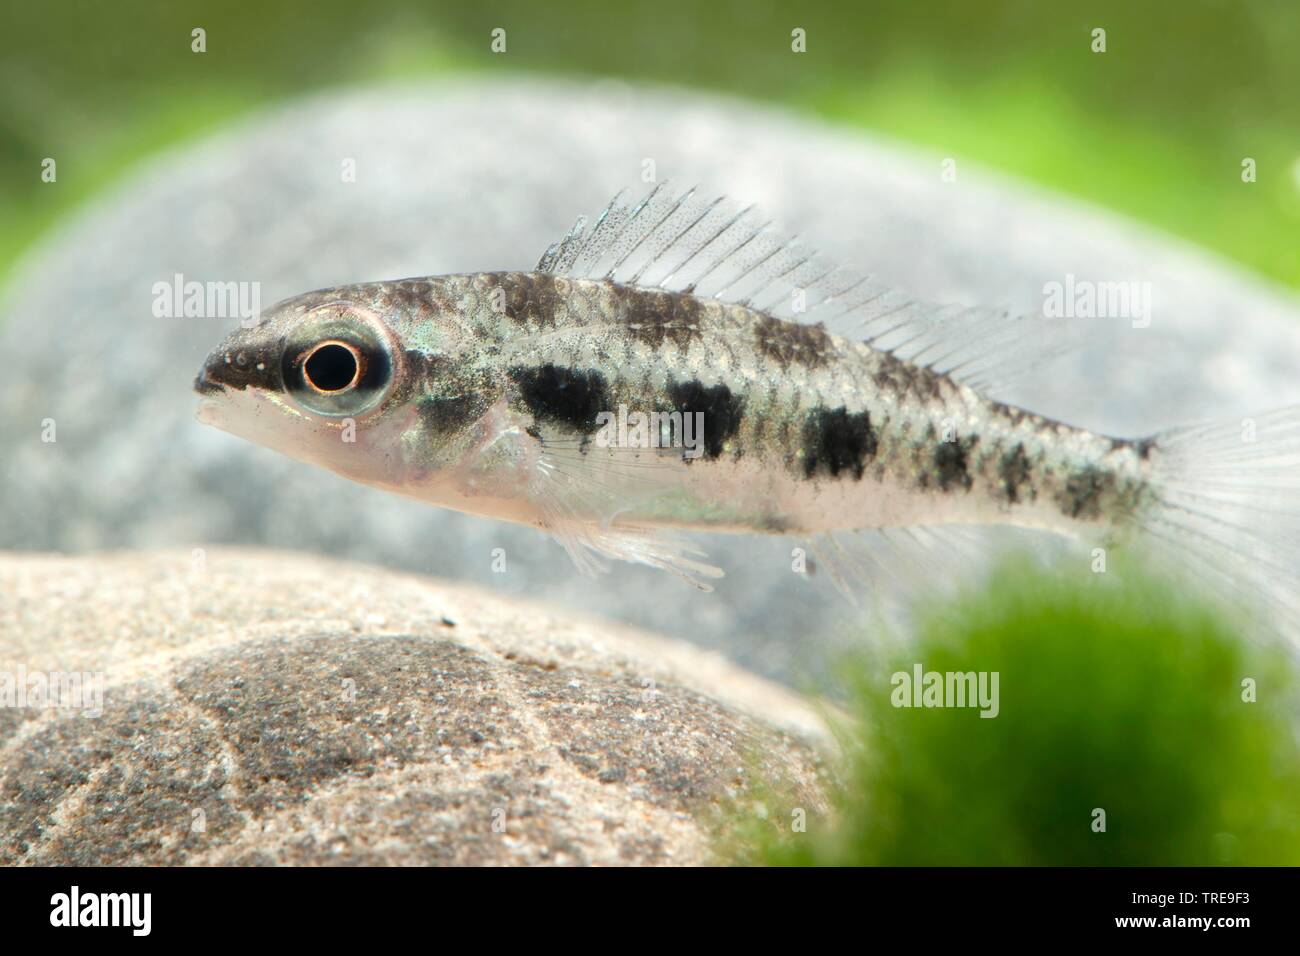 chessboard cichlid, fork-tailed checkerboard cichlid, checkerboard cichlid (Dicrossus filamentosus, Crenicara filamentosa), swimming, side view Stock Photo